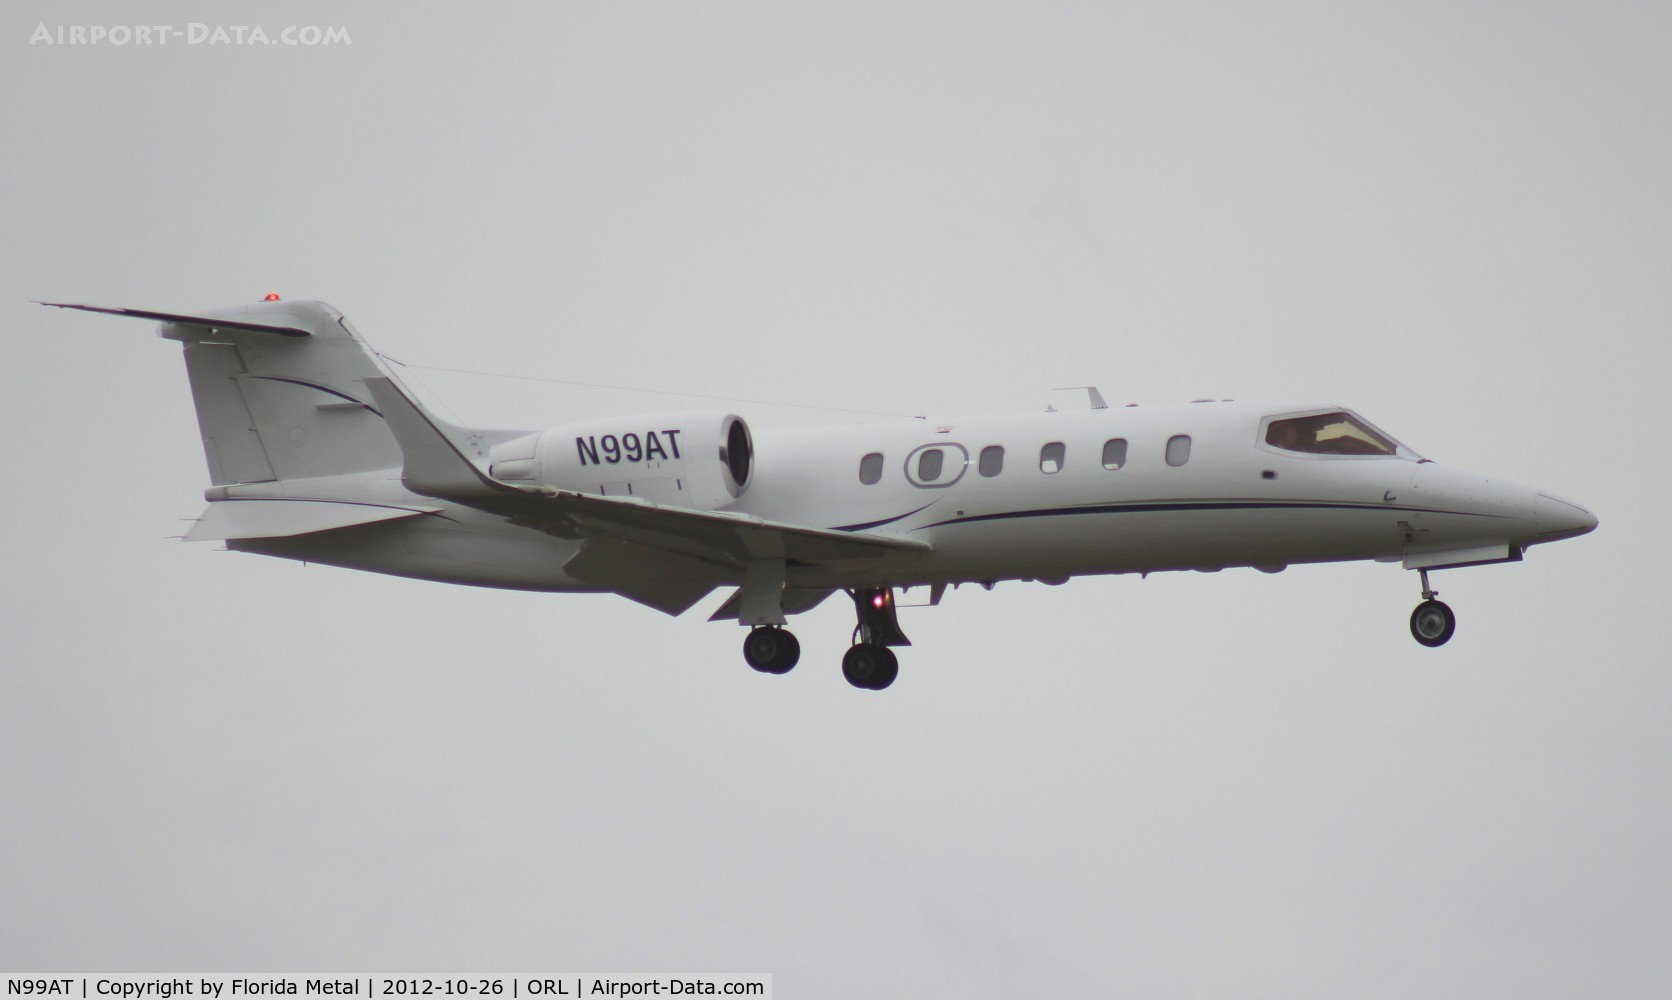 N99AT, 2000 Learjet 31A C/N 31A-202, Lear 31A